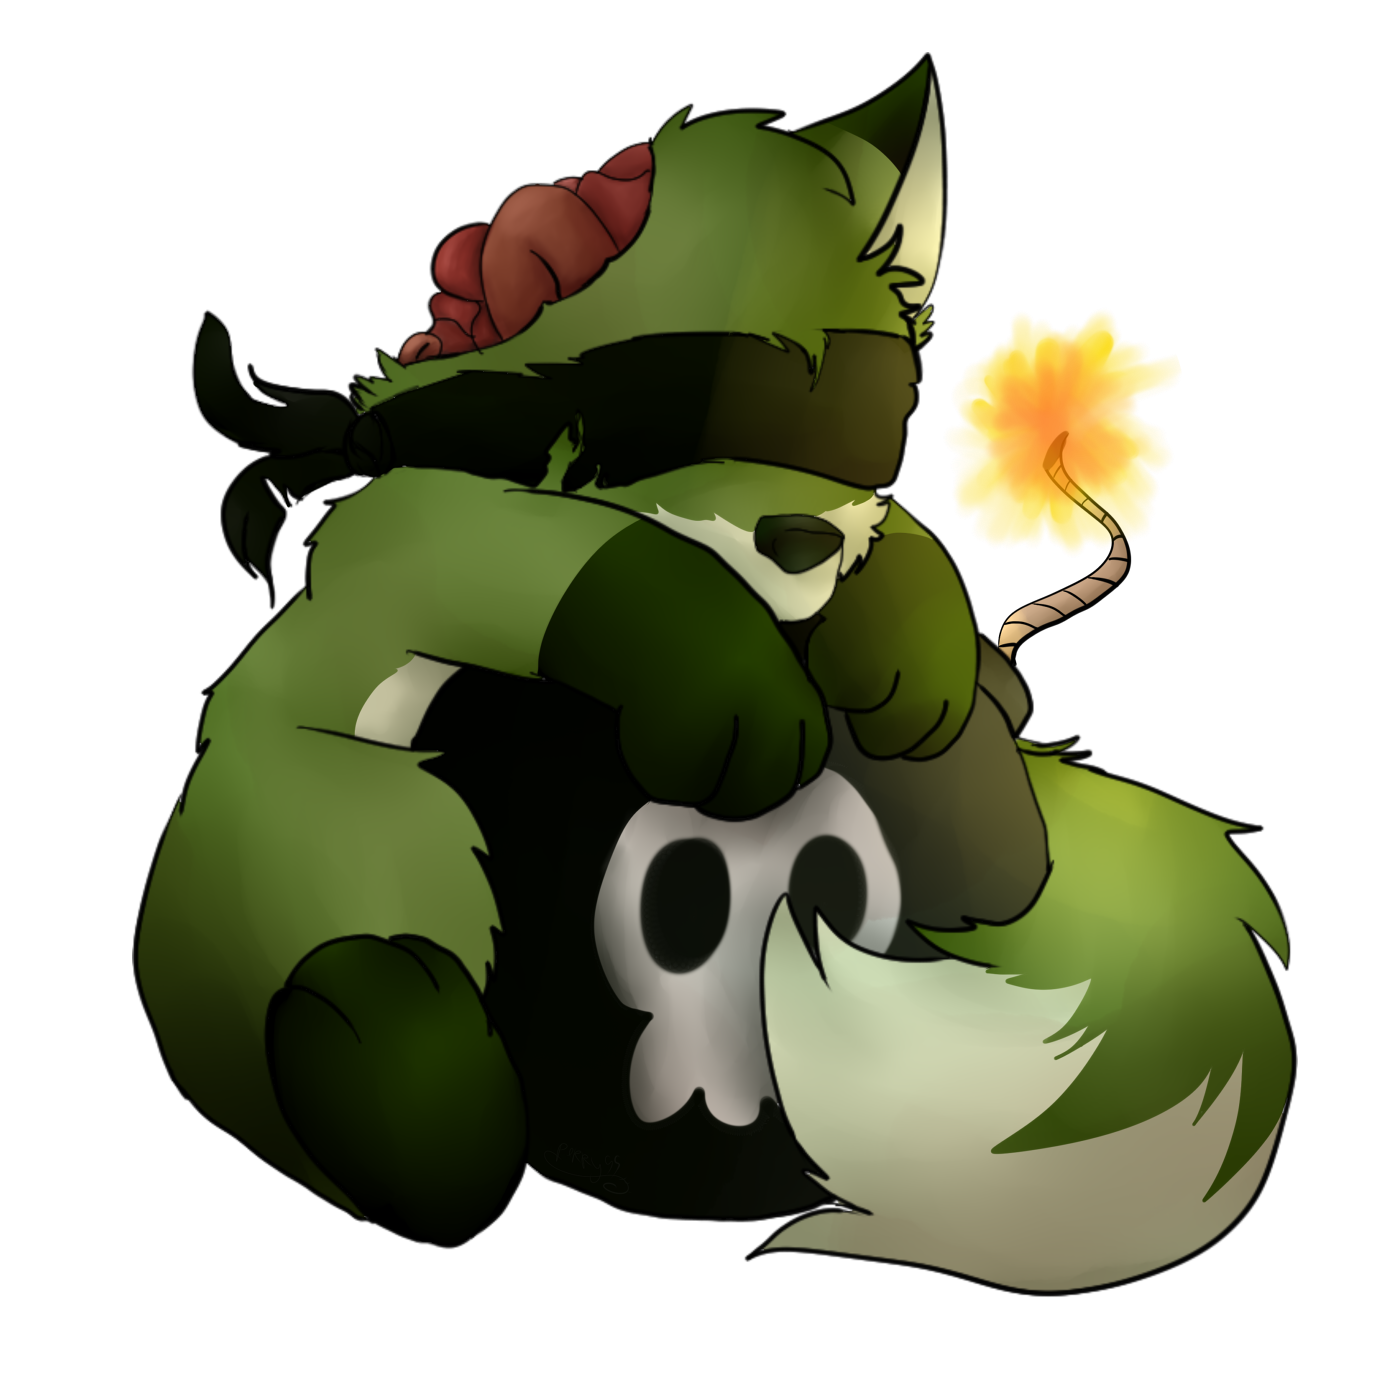 zombie_fox_by_perry99-d74y1sn.png